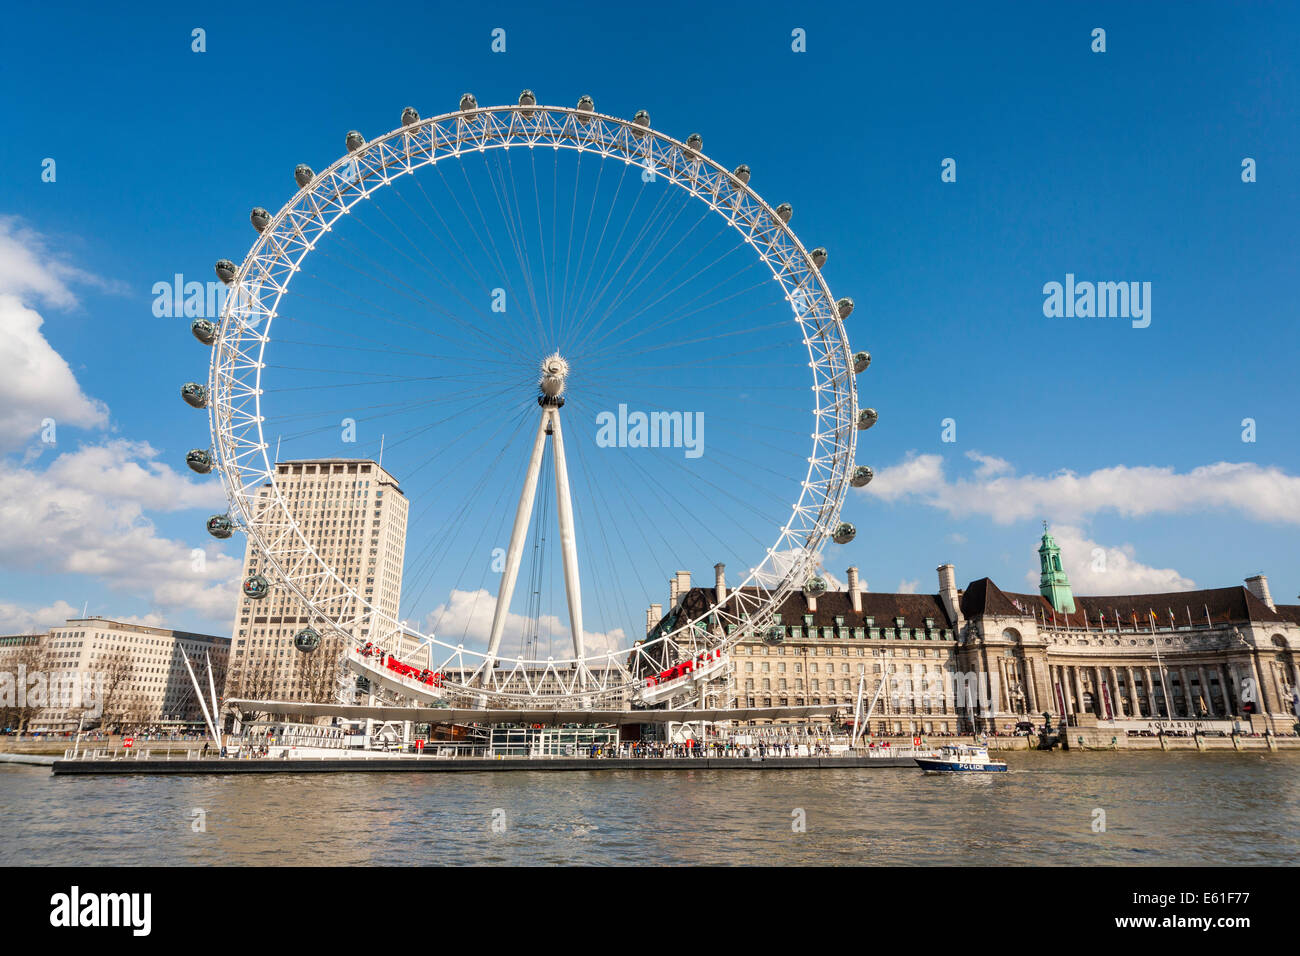 The London Eye or Millenium Wheel on the South Bank of the River Thames in London England UK viewed from the river. JMH6344 Stock Photo